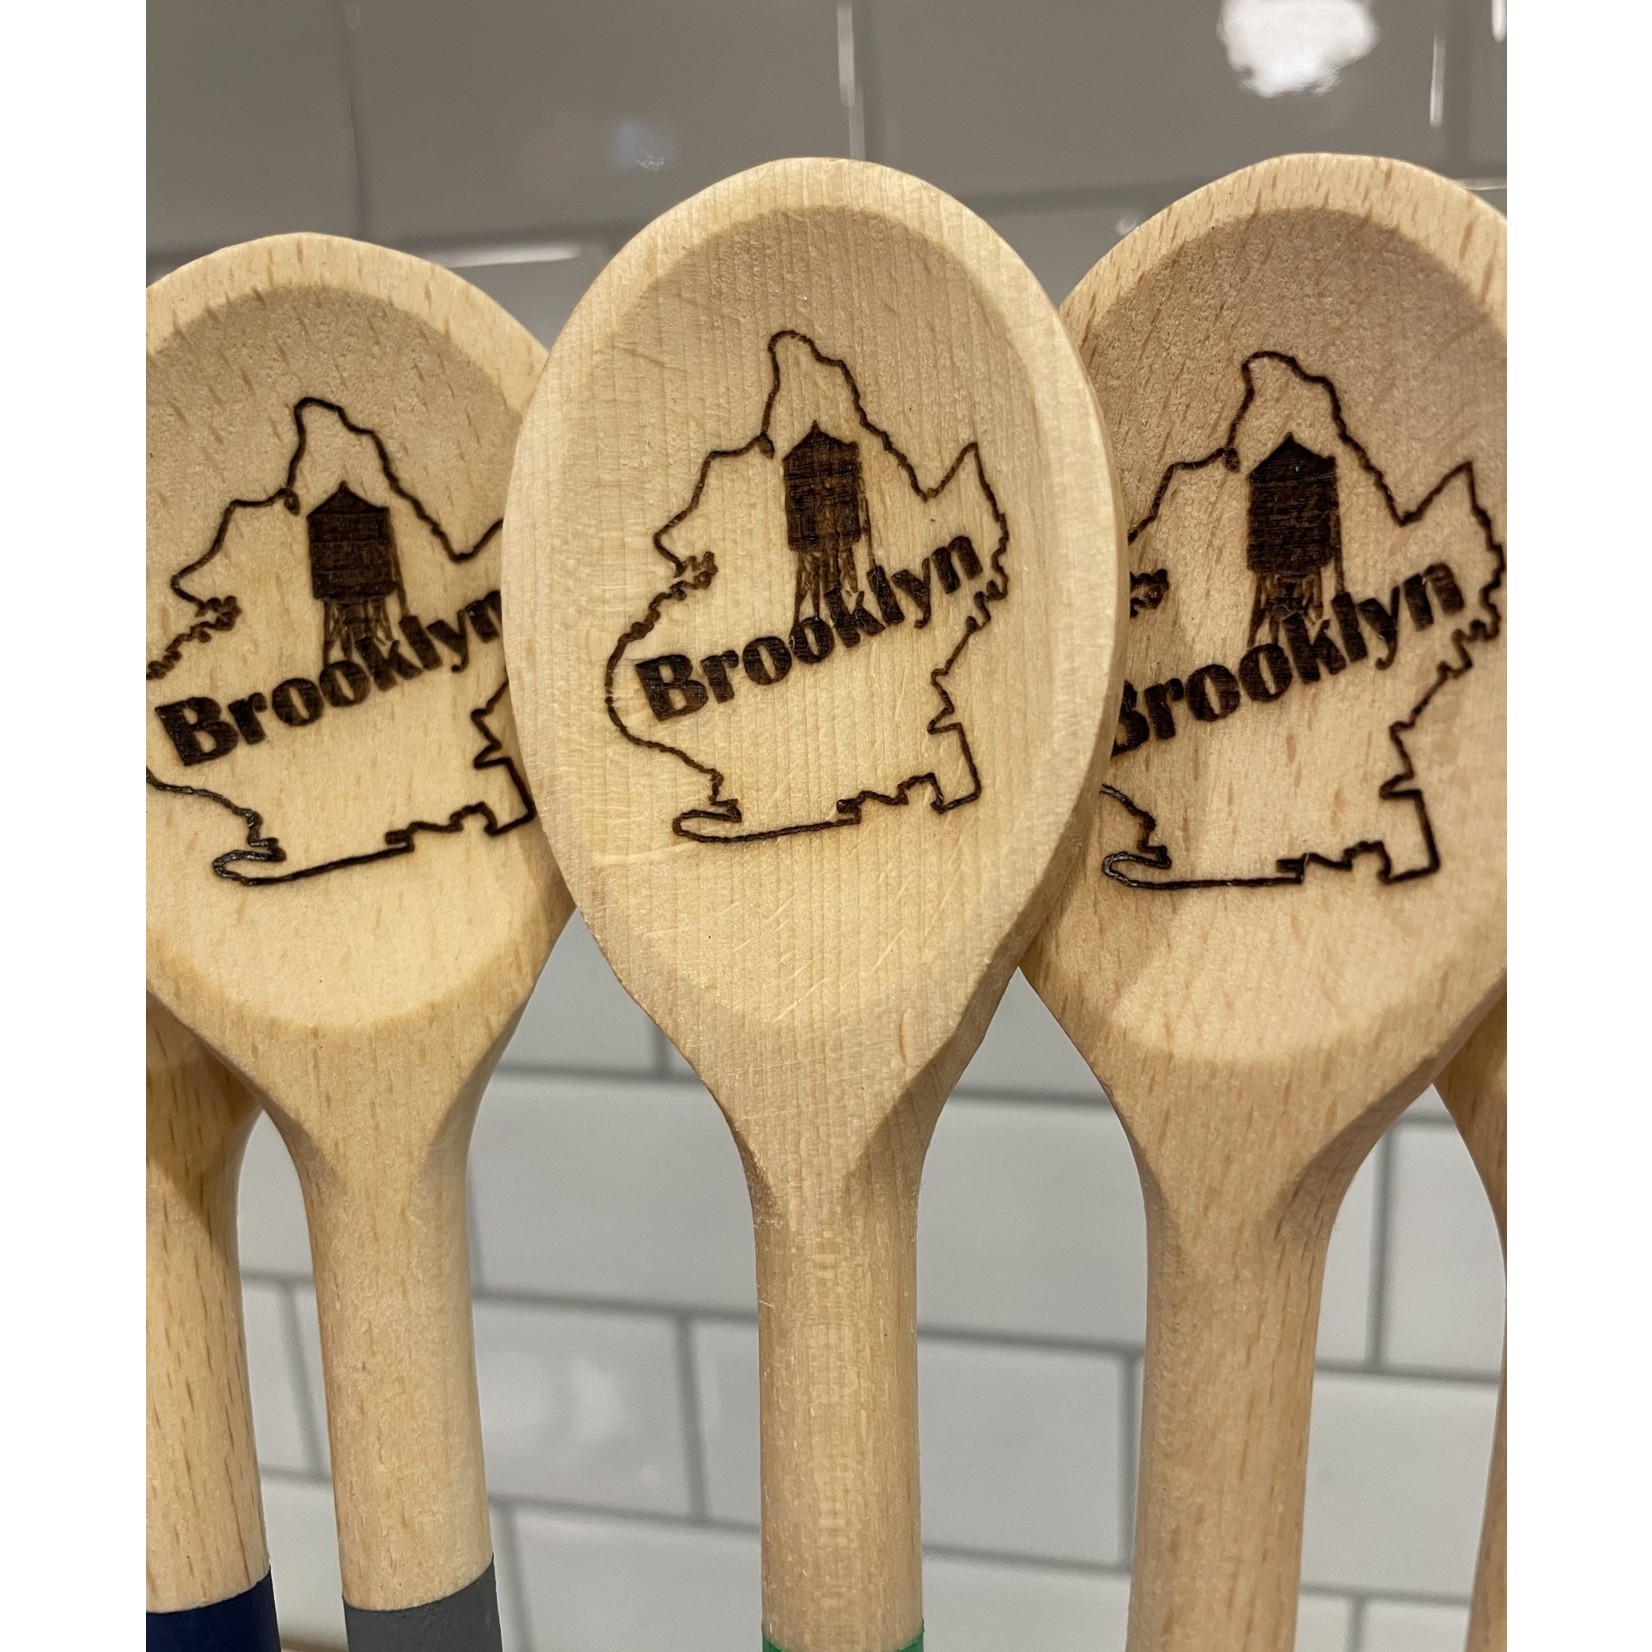 Brooklyn Wooden Spoon Collection